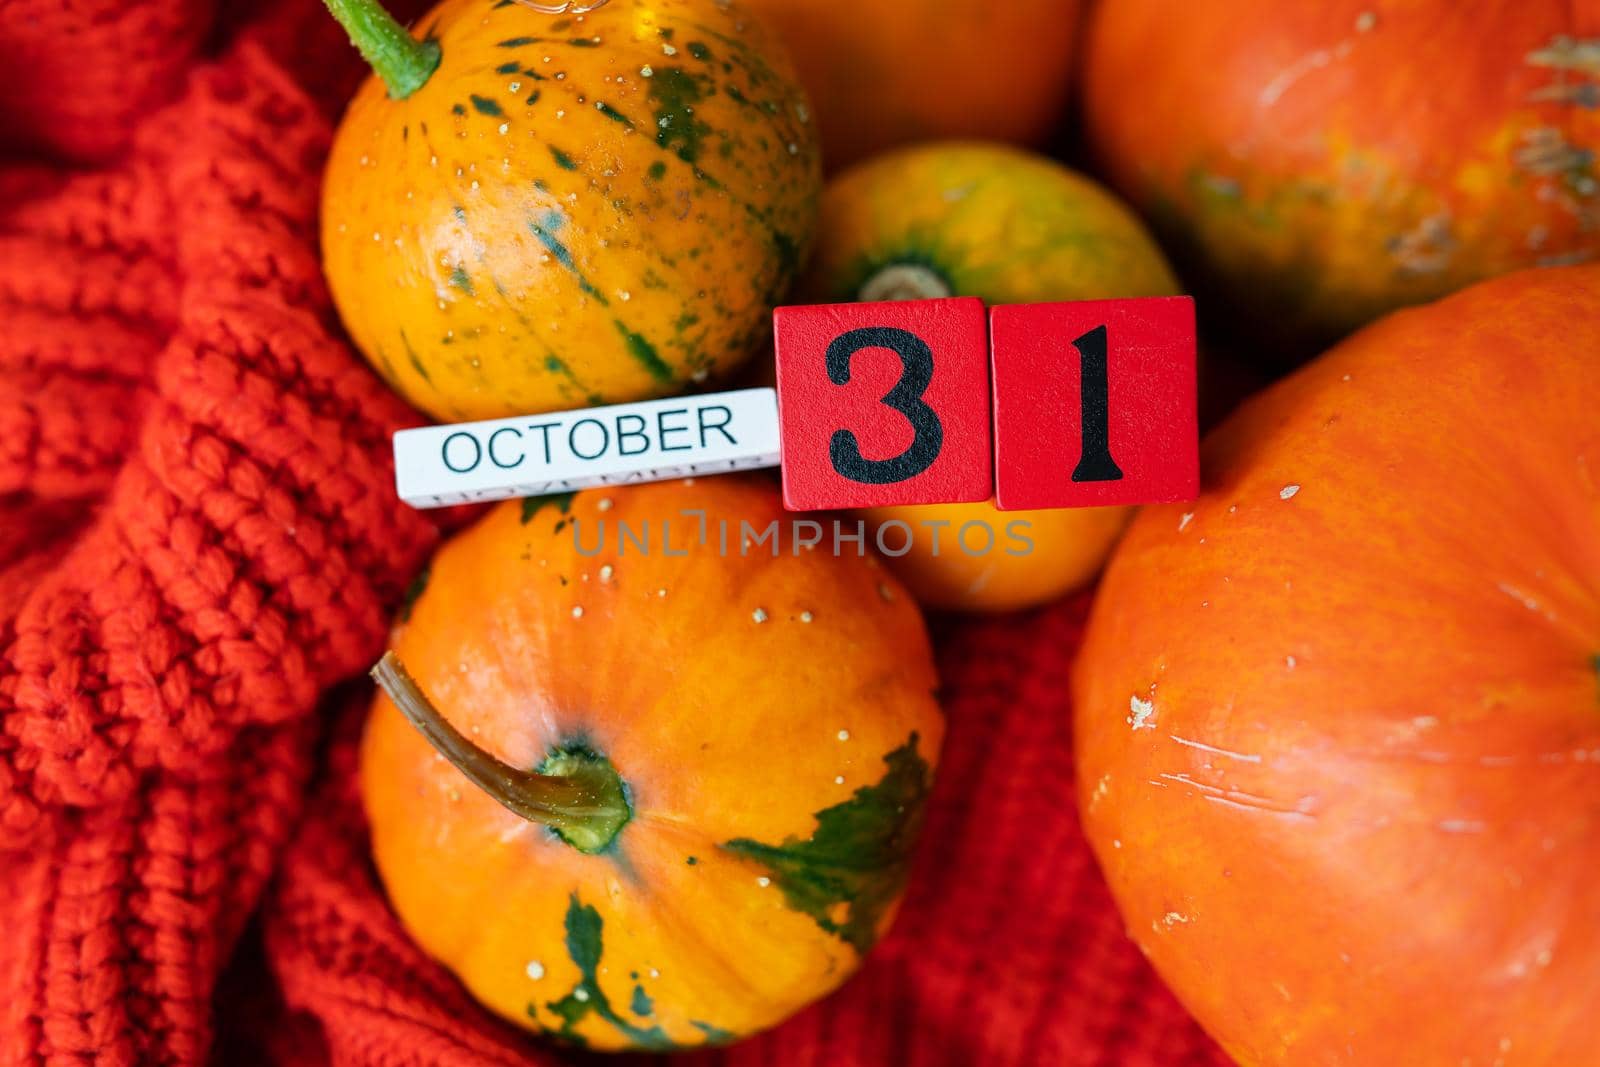 Wooden cube calendar showing October 31st Halloween preparing pumpkins for carving. Holiday and party concept